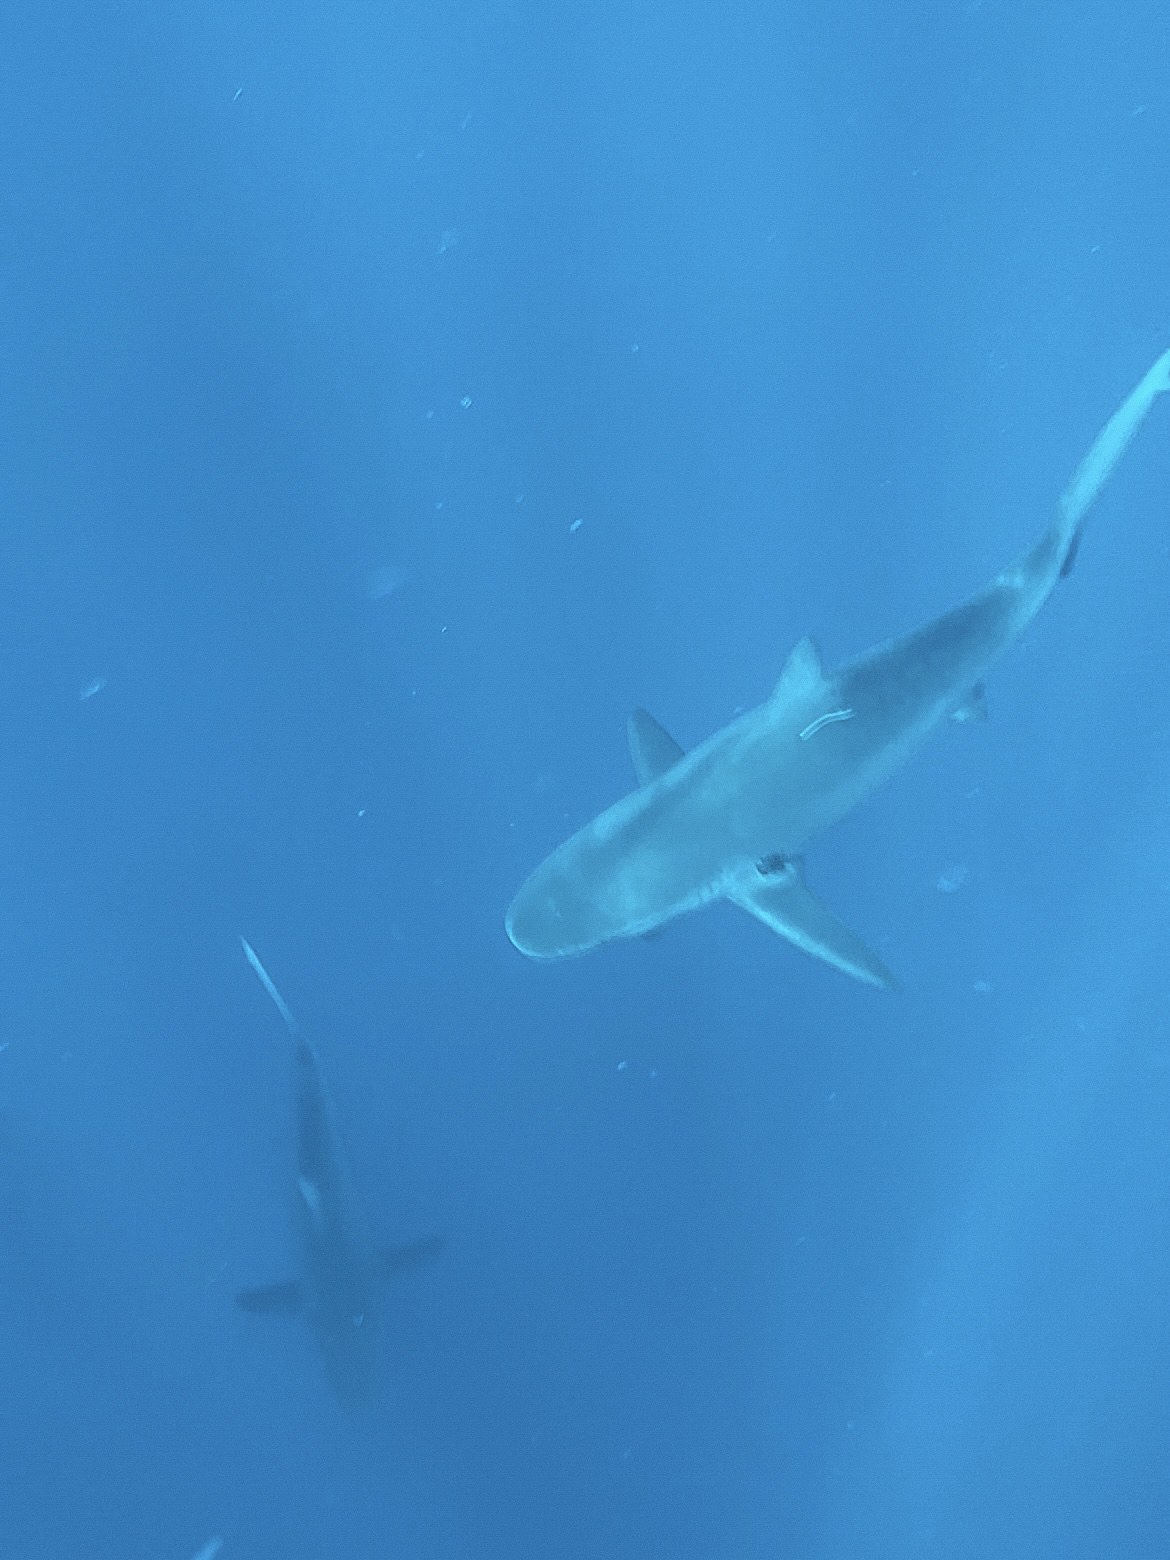 Swimming with galapagos sharks off of the North Shore of Oahu